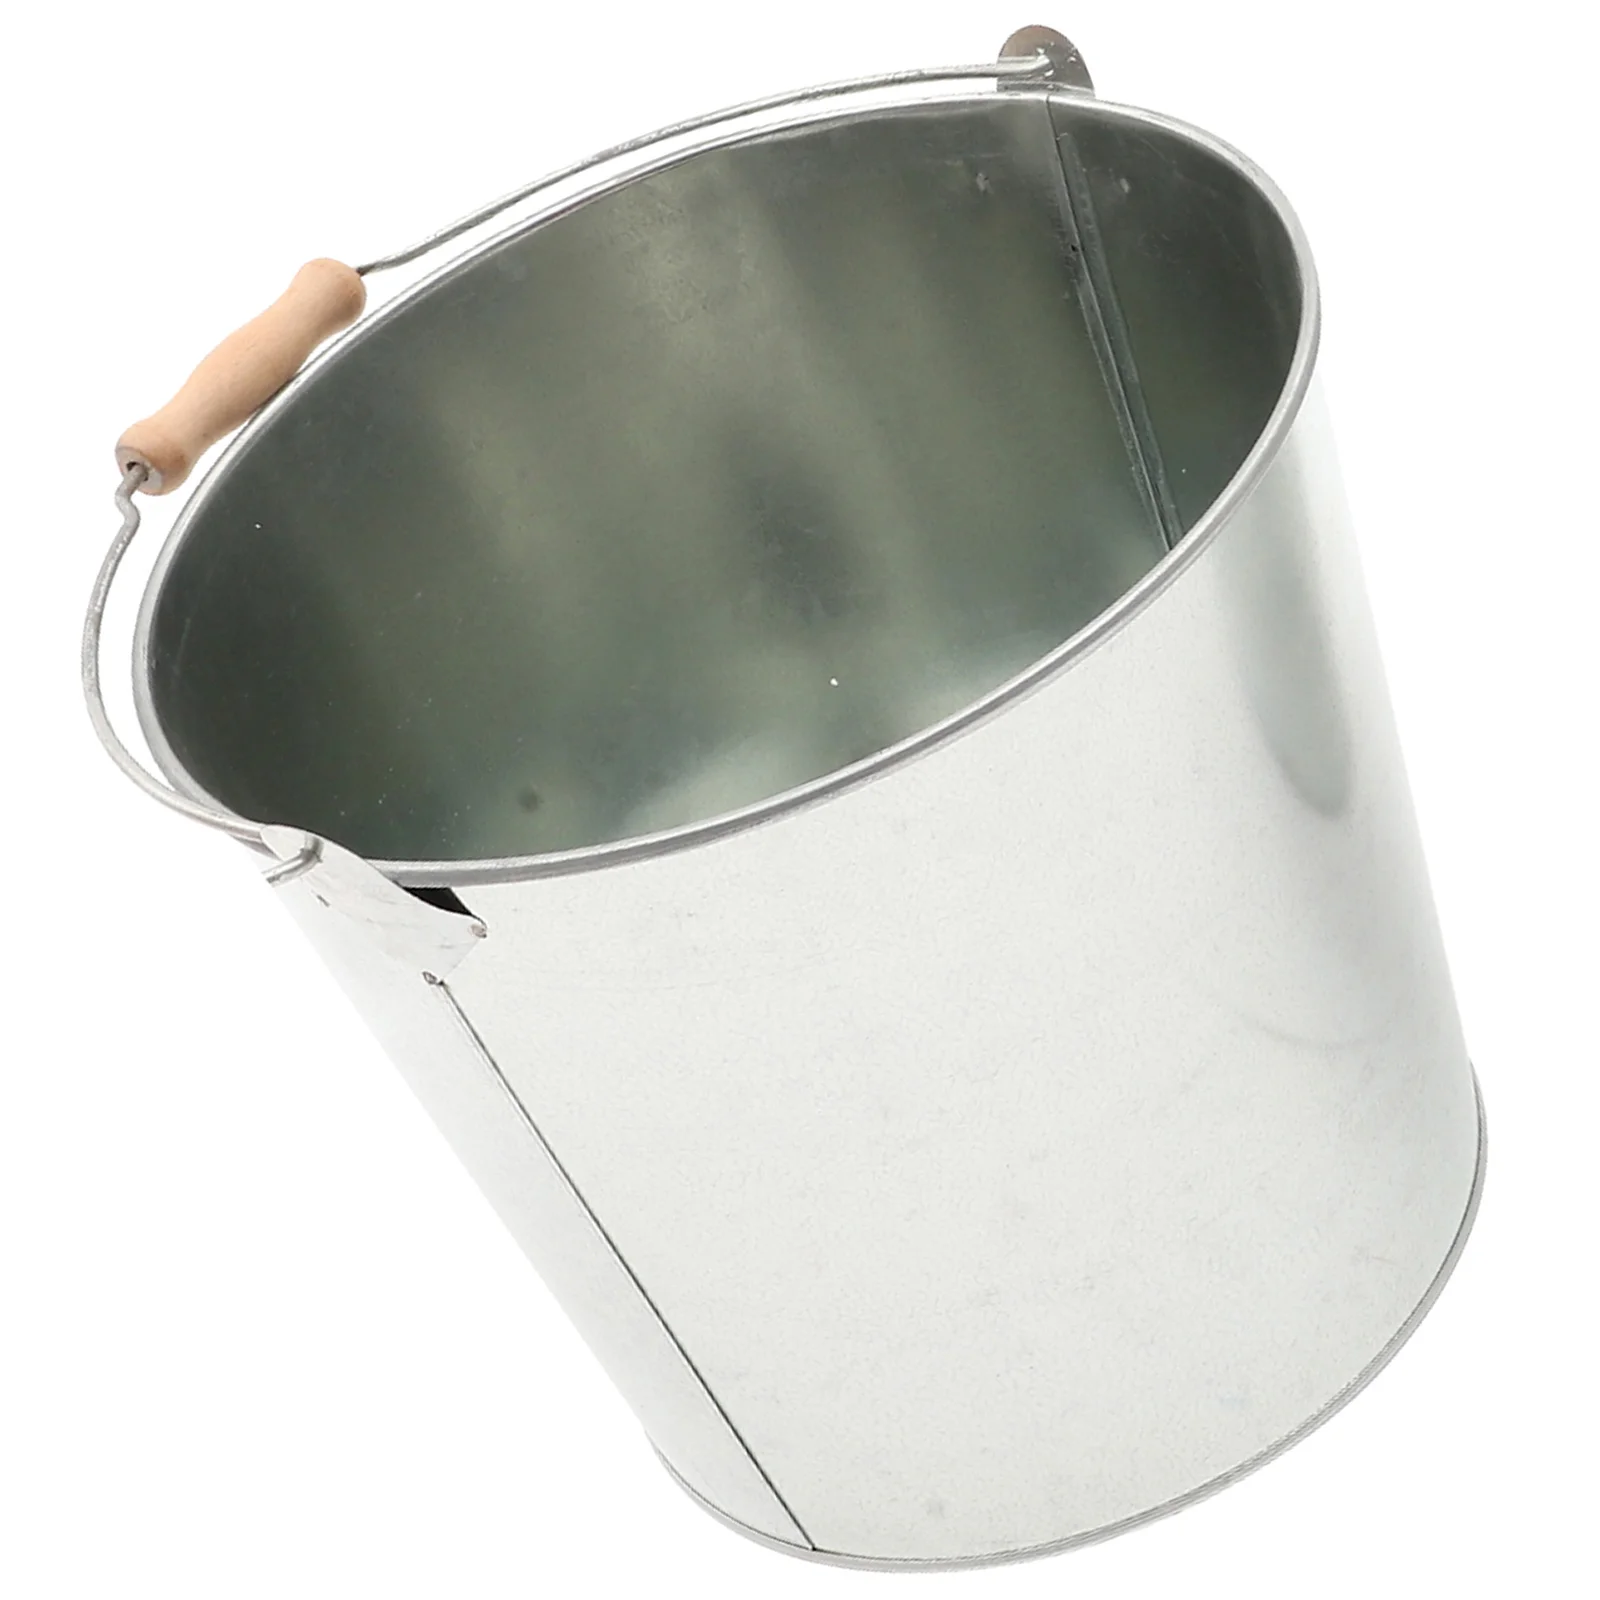 

Bucket Ash Fireplace Storage Metal Pail Can Burning Oil Coal Container Holder Wood Stove Bin Incinerator Charcoal Indoor Fire